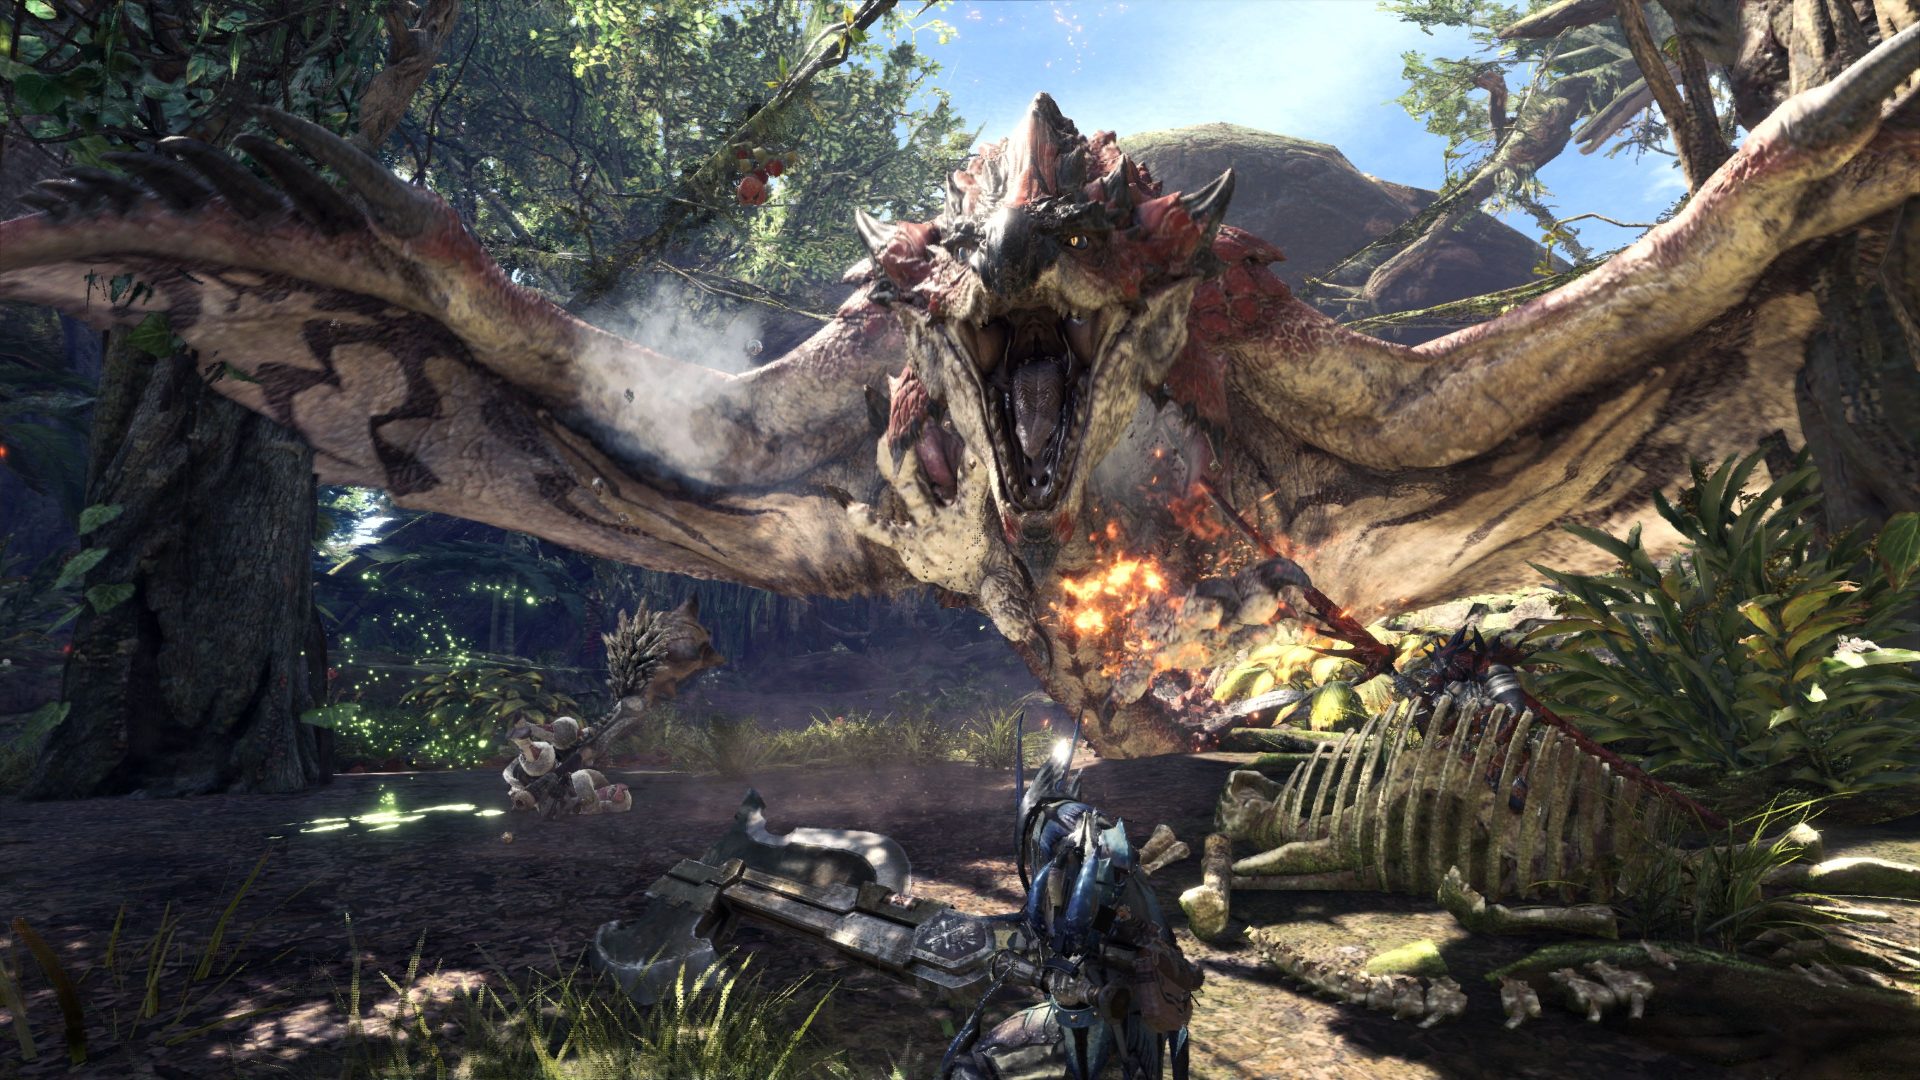 New Monster Hunter World Pc Patch Out On October 30th Fixes Low Resolution Textures Improves Keyboard Controls